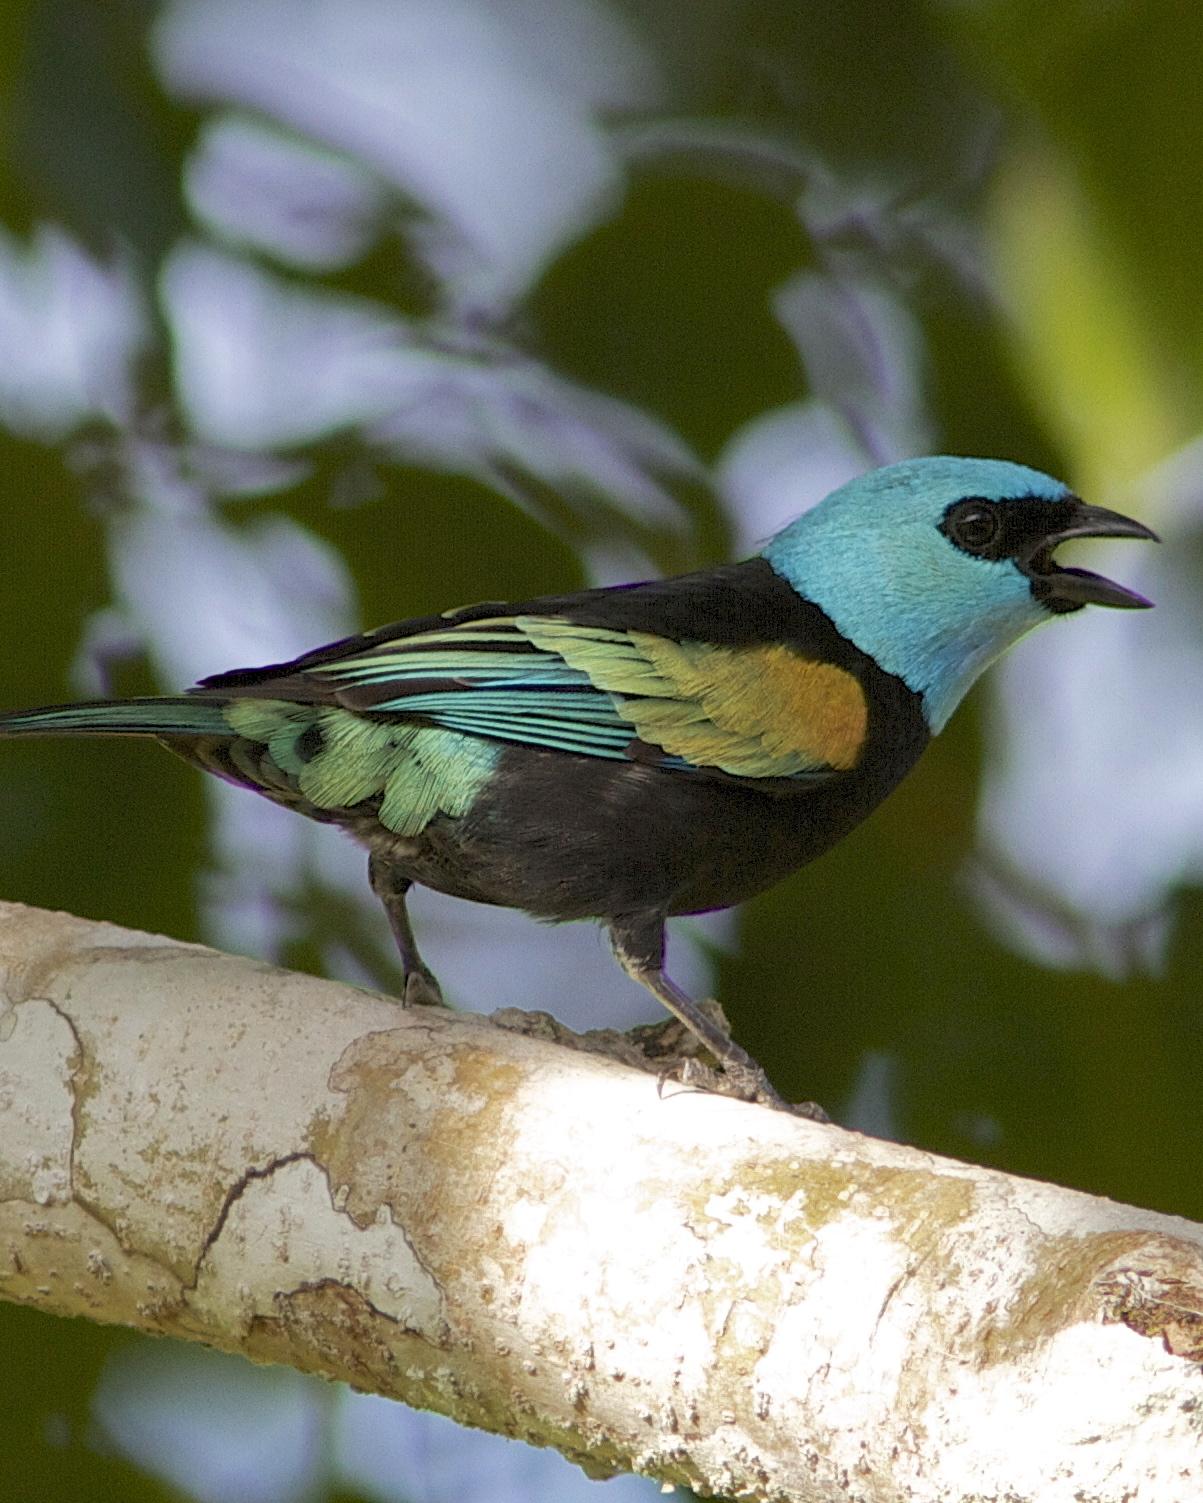 Blue-necked Tanager Photo by Marcelo Padua